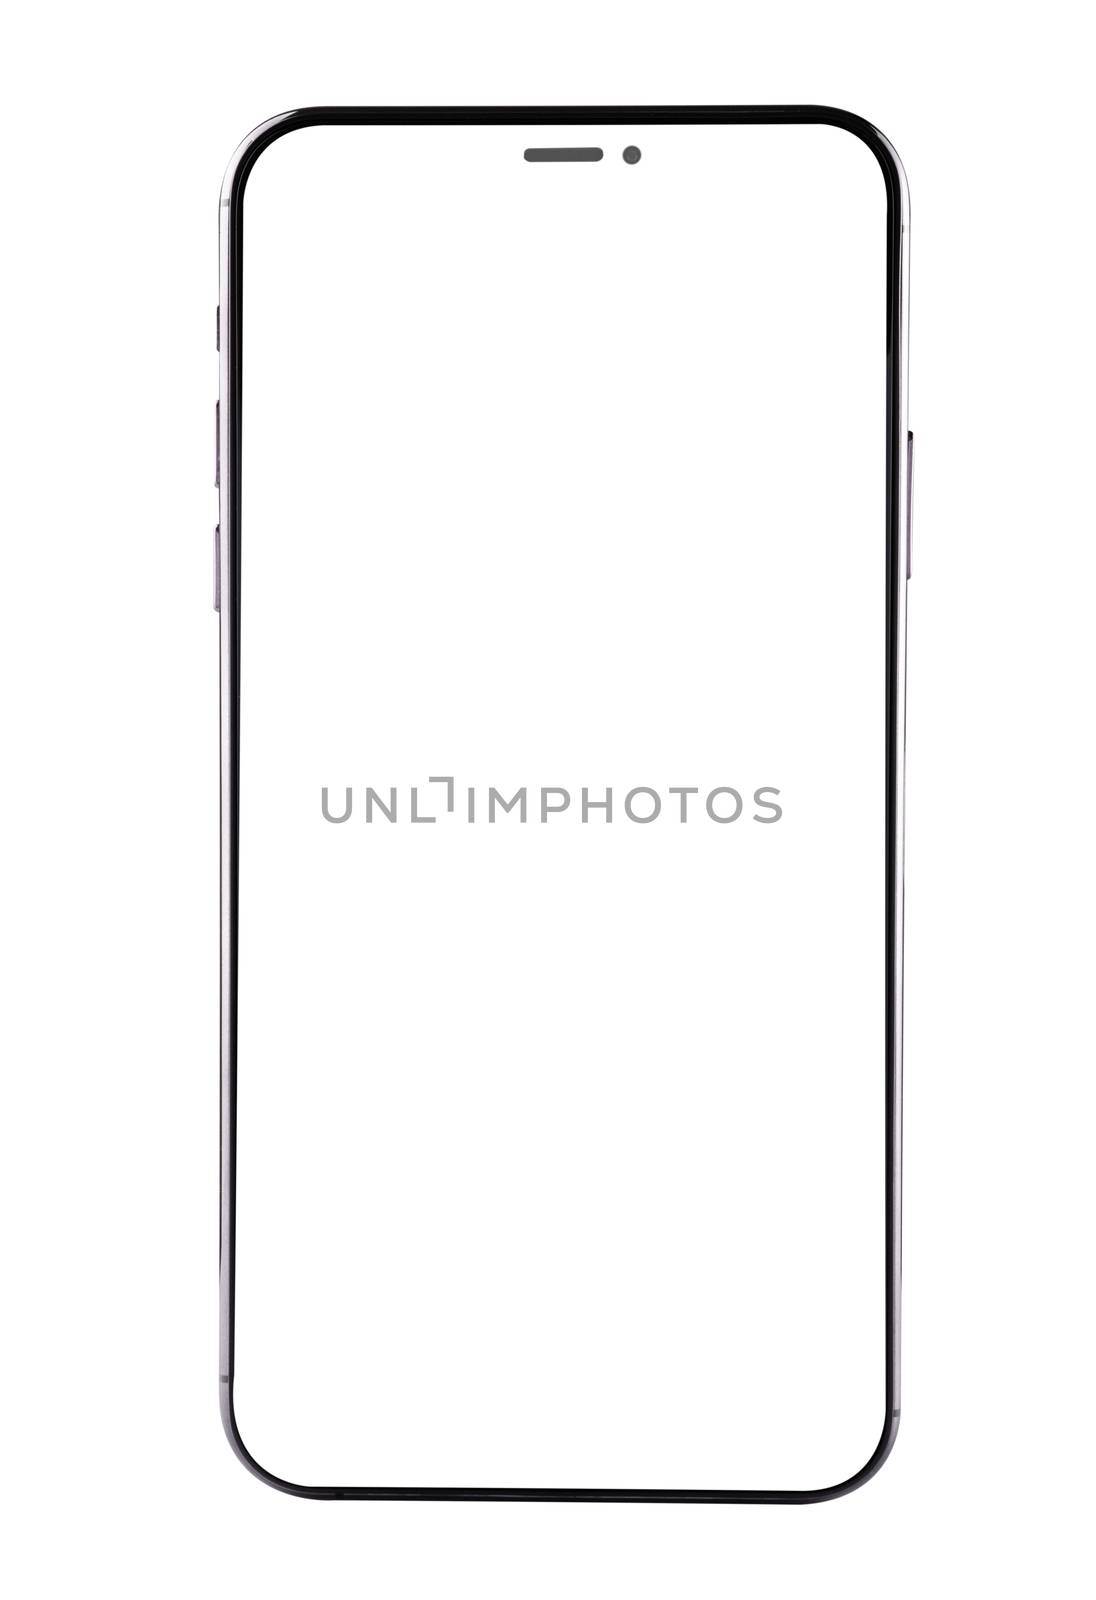 Closeup modern digital black Smartphone mobile mock up blank front screen isolated on white background, no clipping path